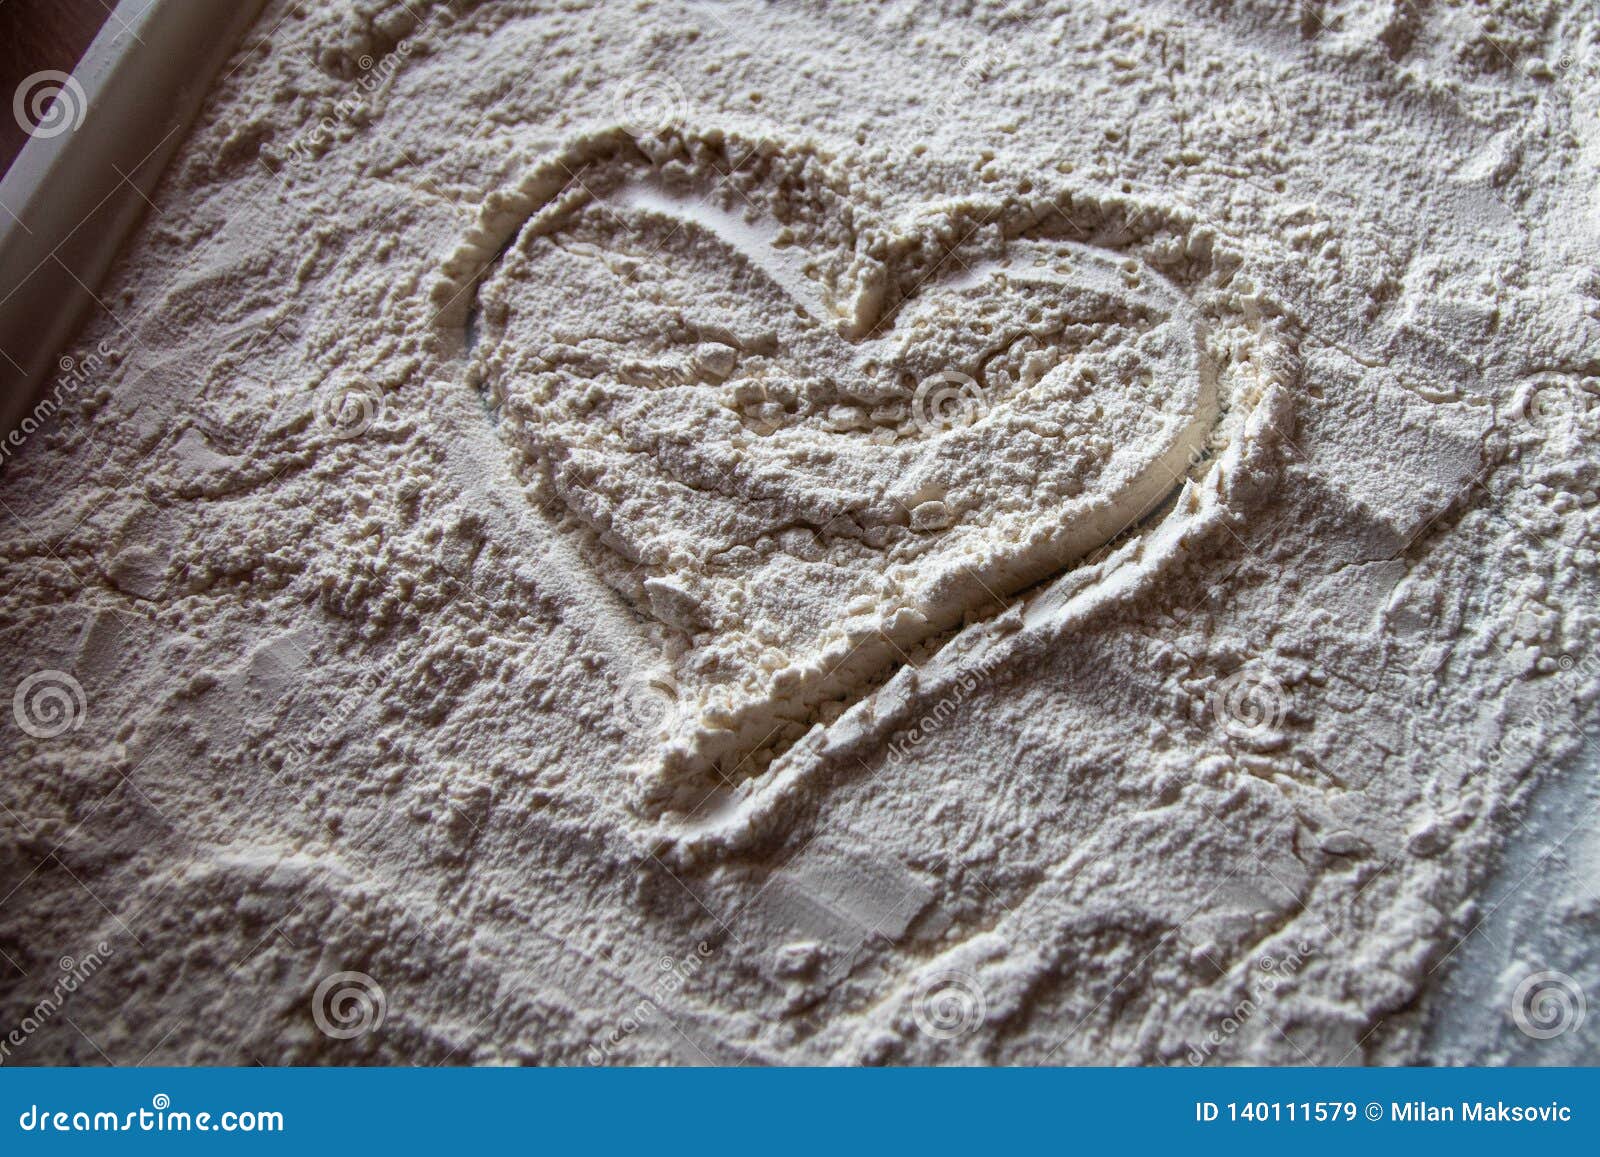 Heart of Flour on a White Plate Stock Image - Image of nature, heart ...